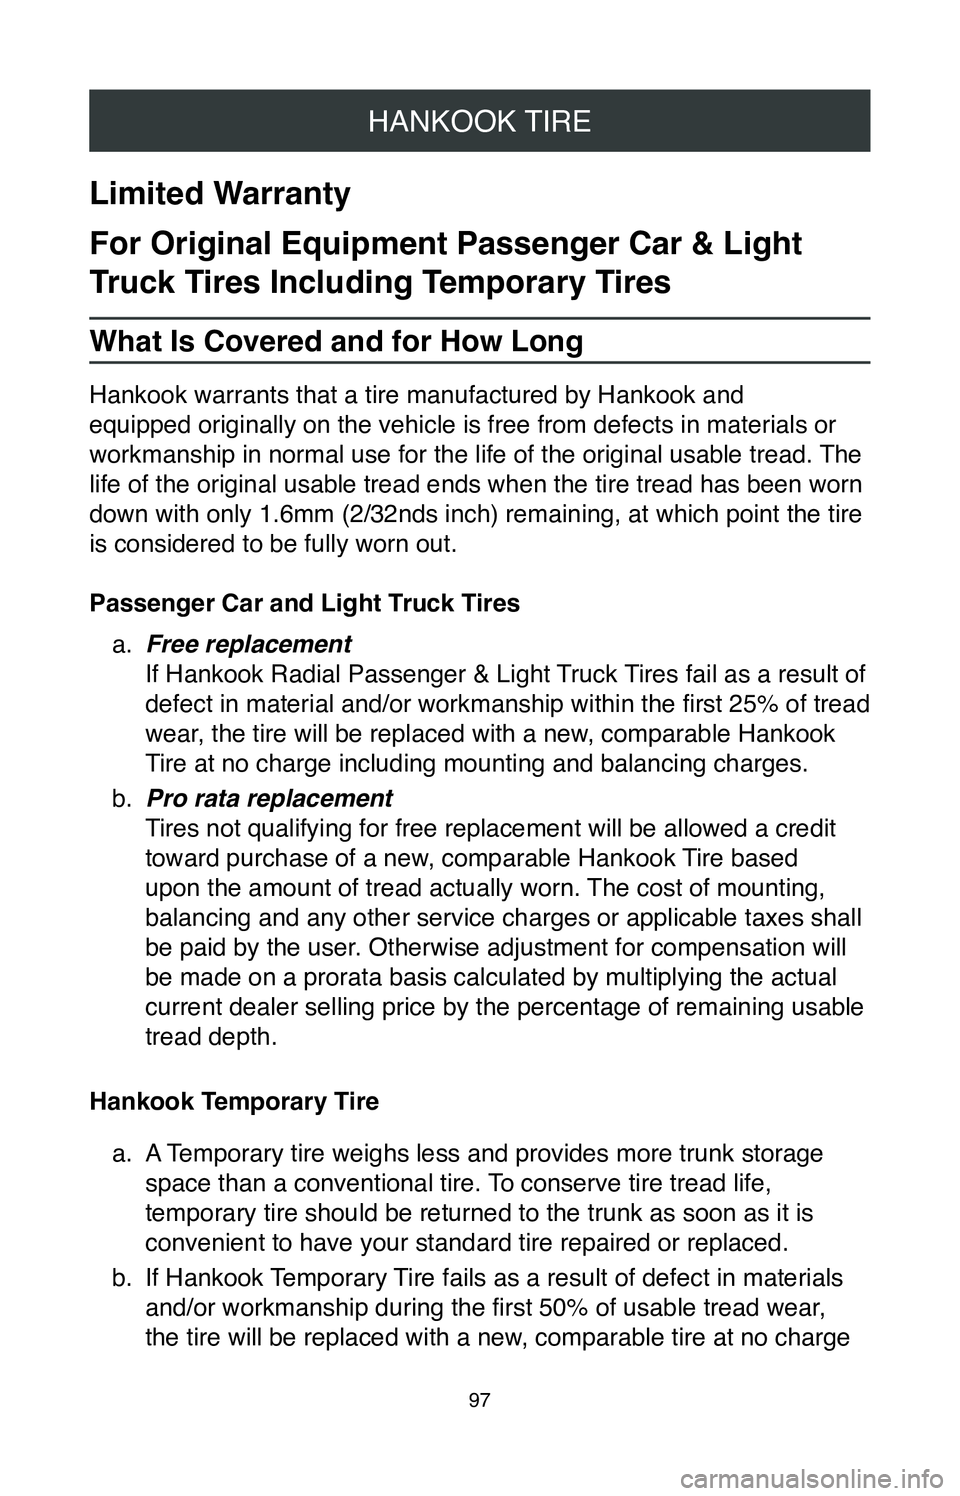 TOYOTA LAND CRUISER 2020  Warranties & Maintenance Guides (in English) HANKOOK TIRE
97
Limited Warranty
For Original Equipment Passenger Car & Light 
Truck Tires Including Temporary Tires
What Is Covered and for How Long
Hankook warrants that a tire manufactured by Hanko